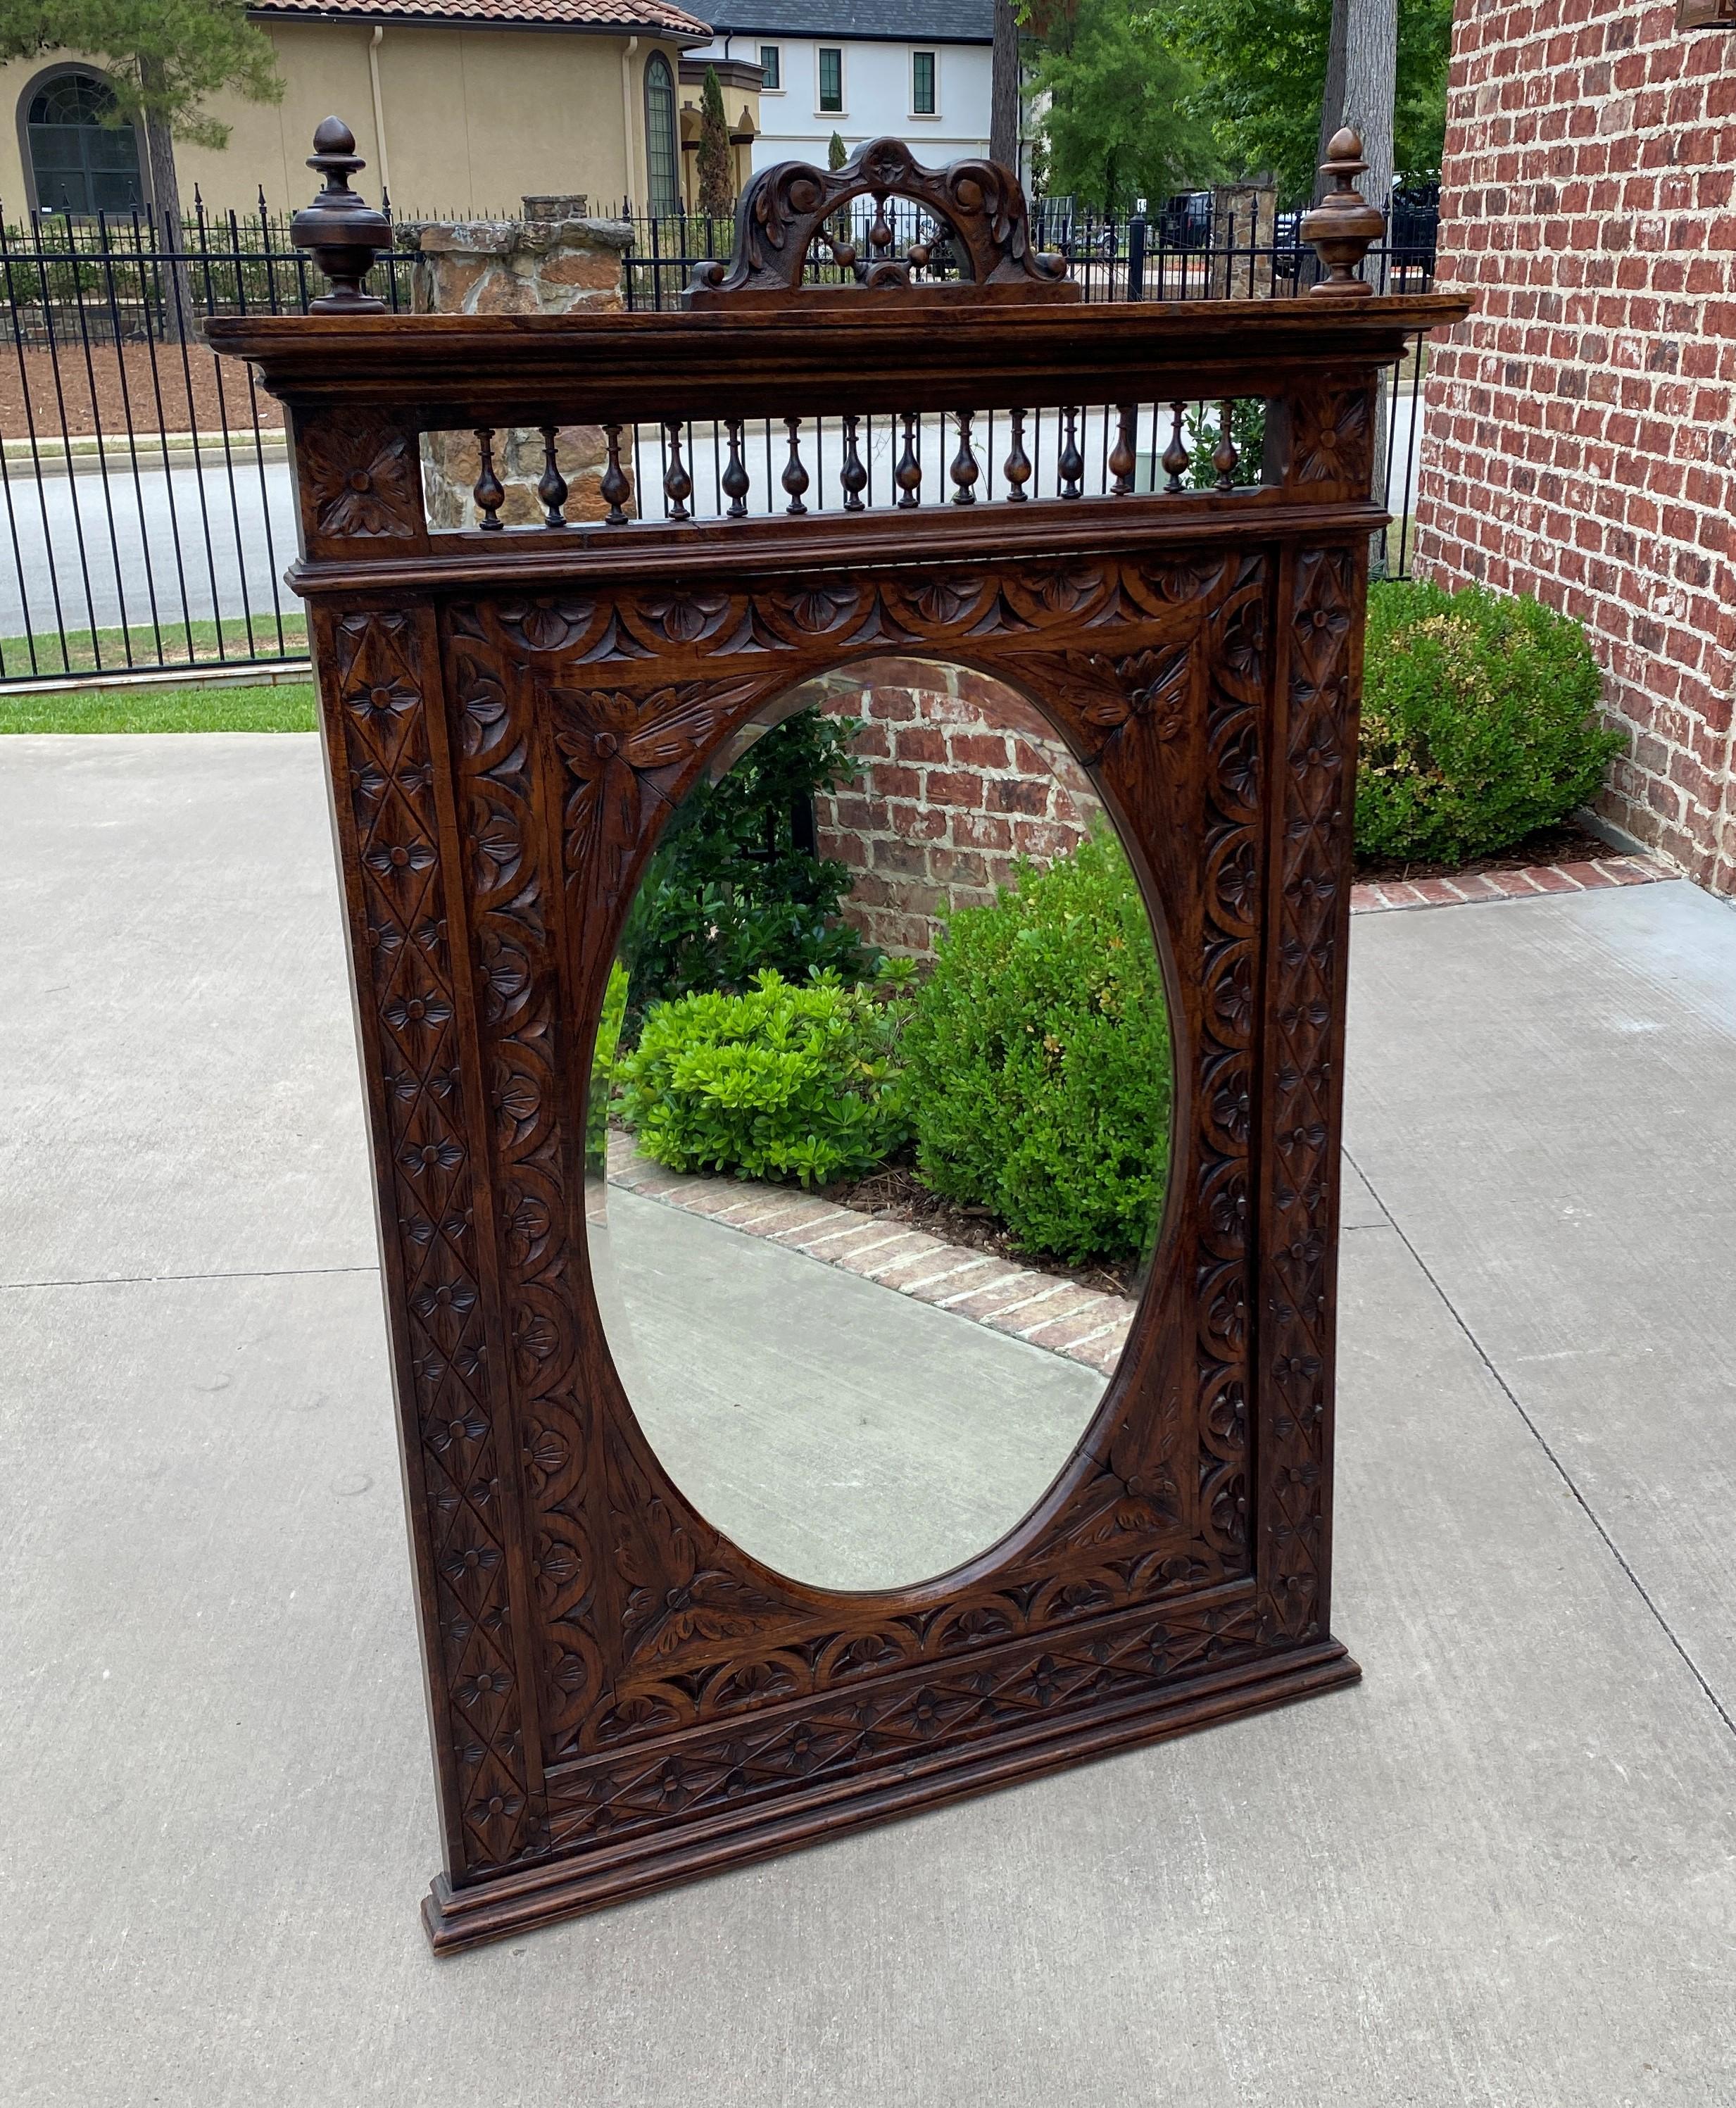 Beautiful antique French Breton oak highly carved framed beveled oval wall mirror ~c. 1890s

Traditional and timeless~~popular French Breton style with spindles and finials~~beveled mirror with highly carved frame with acanthus and floral